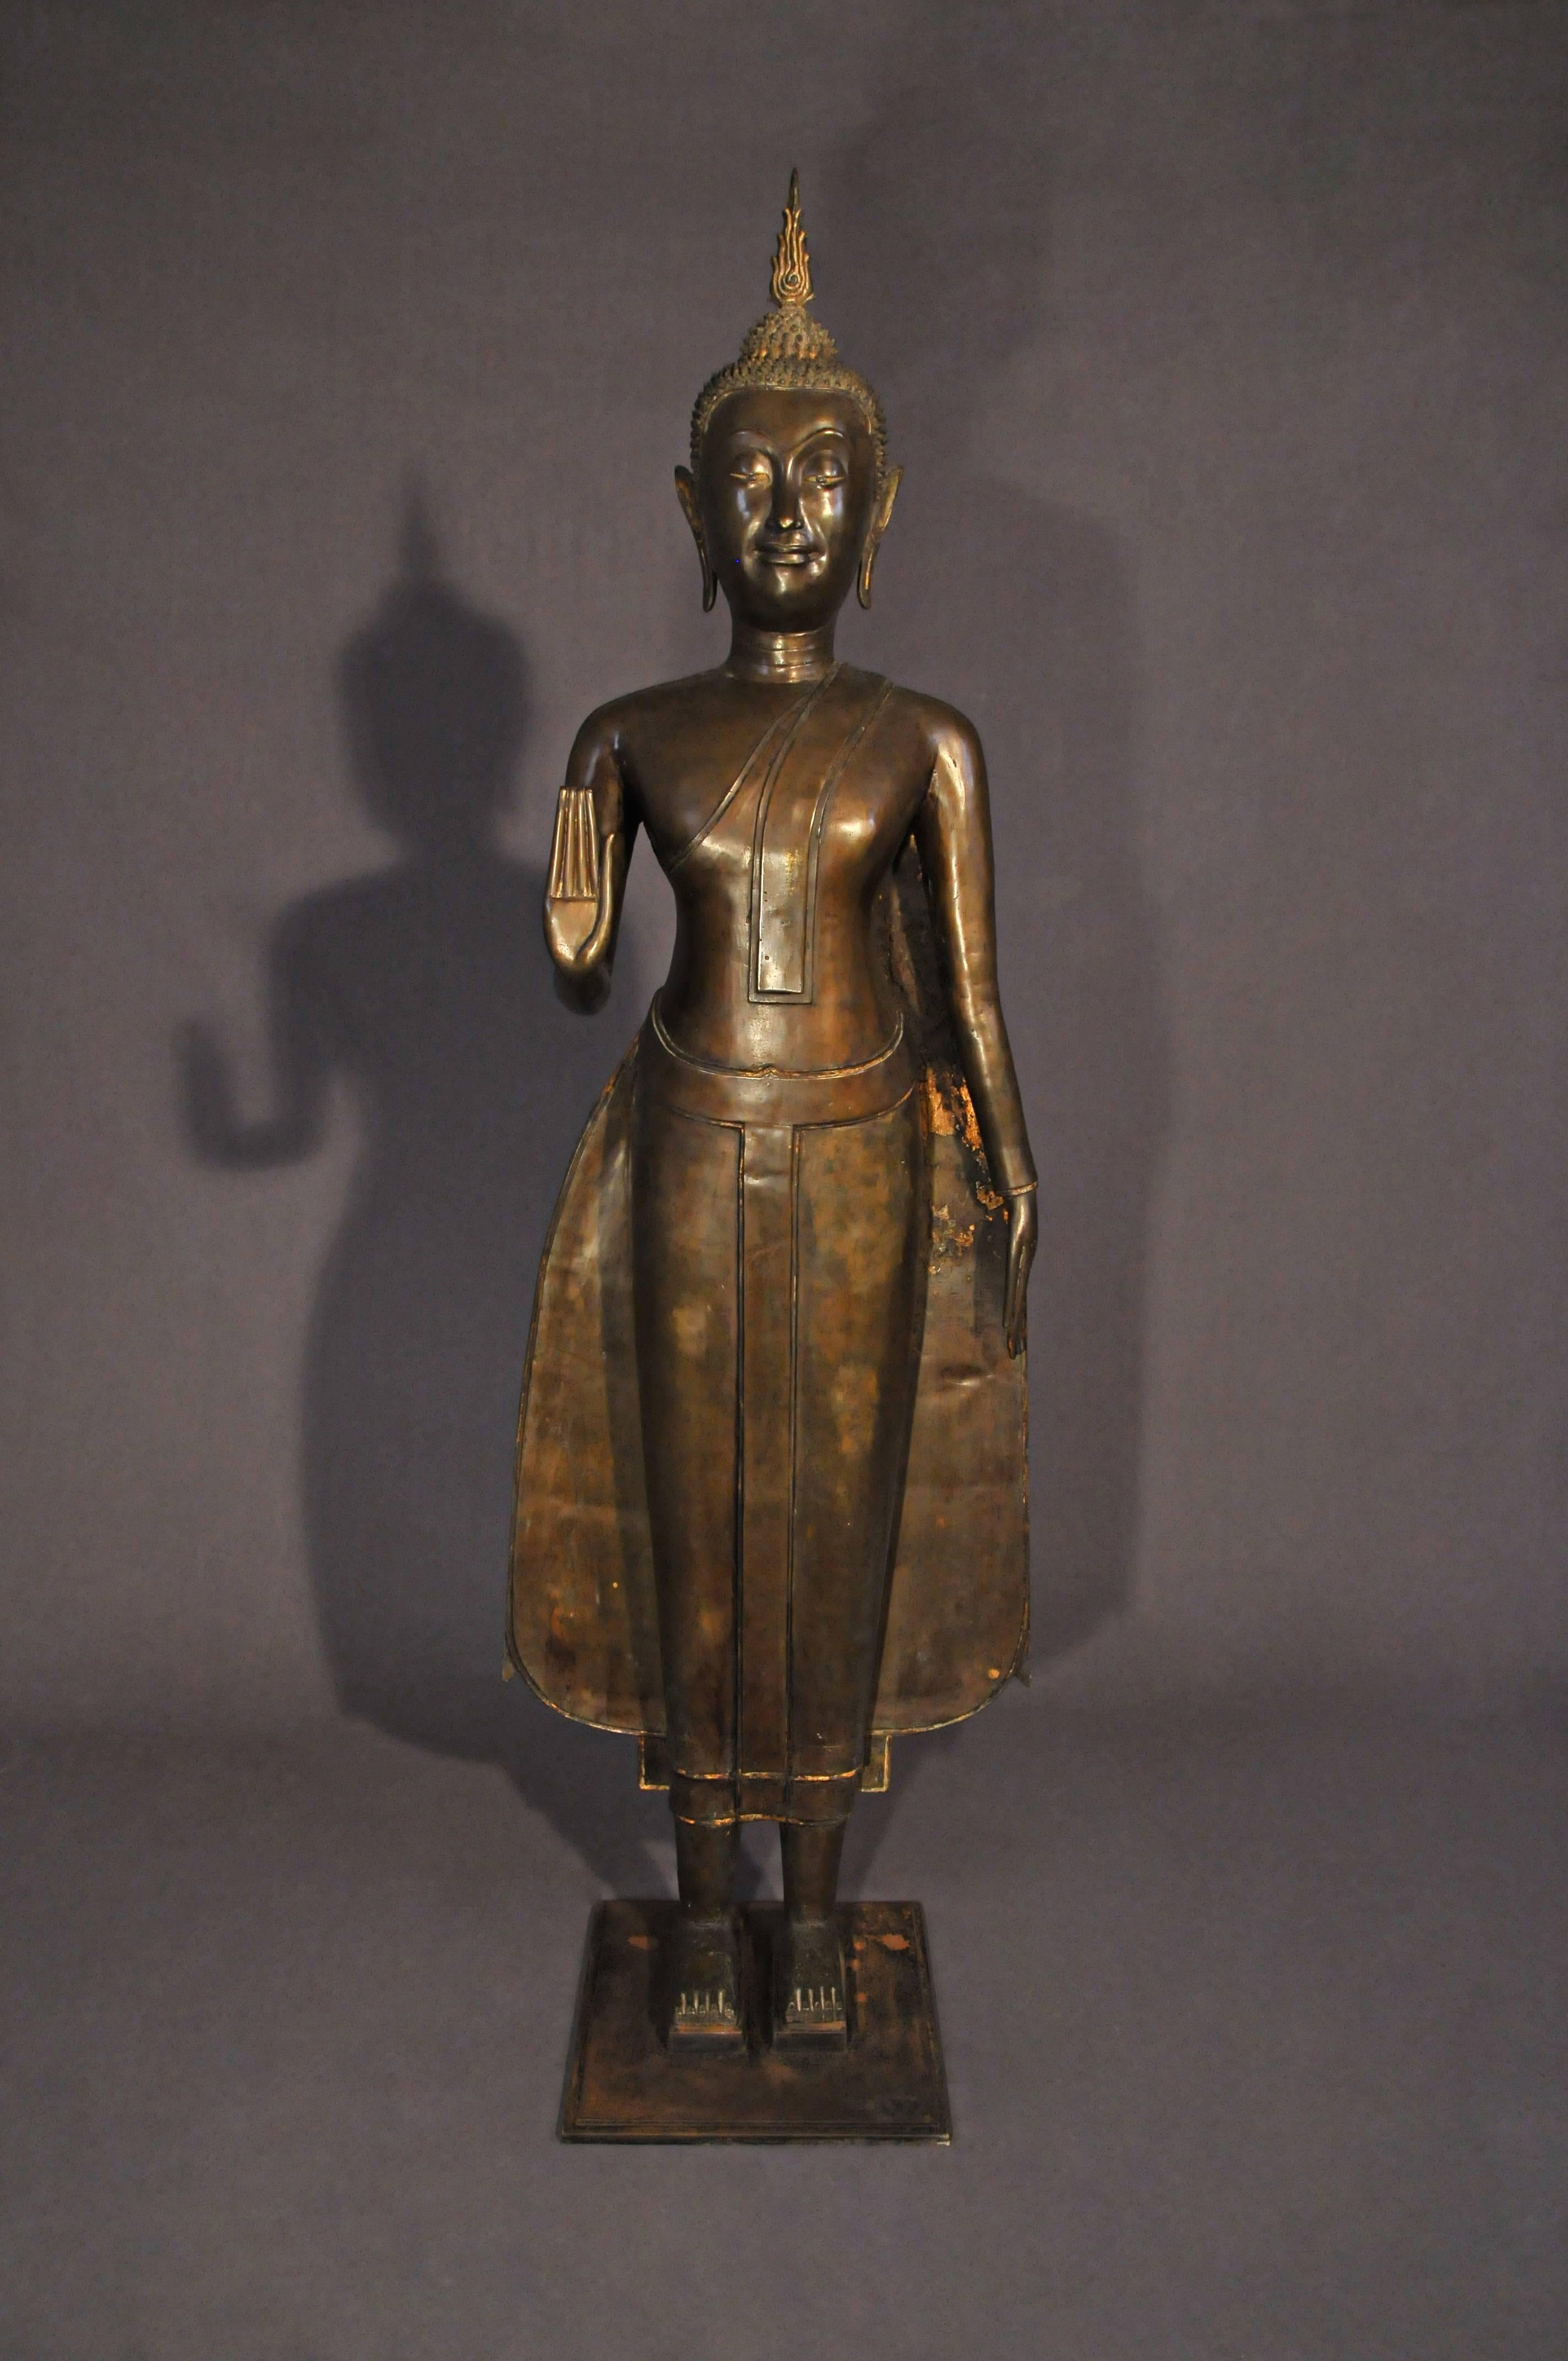 In Ayutthaya period, Buddha images appear more different gestures than the other previous period under the influences of Lopburi, U Thong, and Sukhothai styles. This standing Buddha adopted the Sukhothai style of sculpture showing an oval face, long